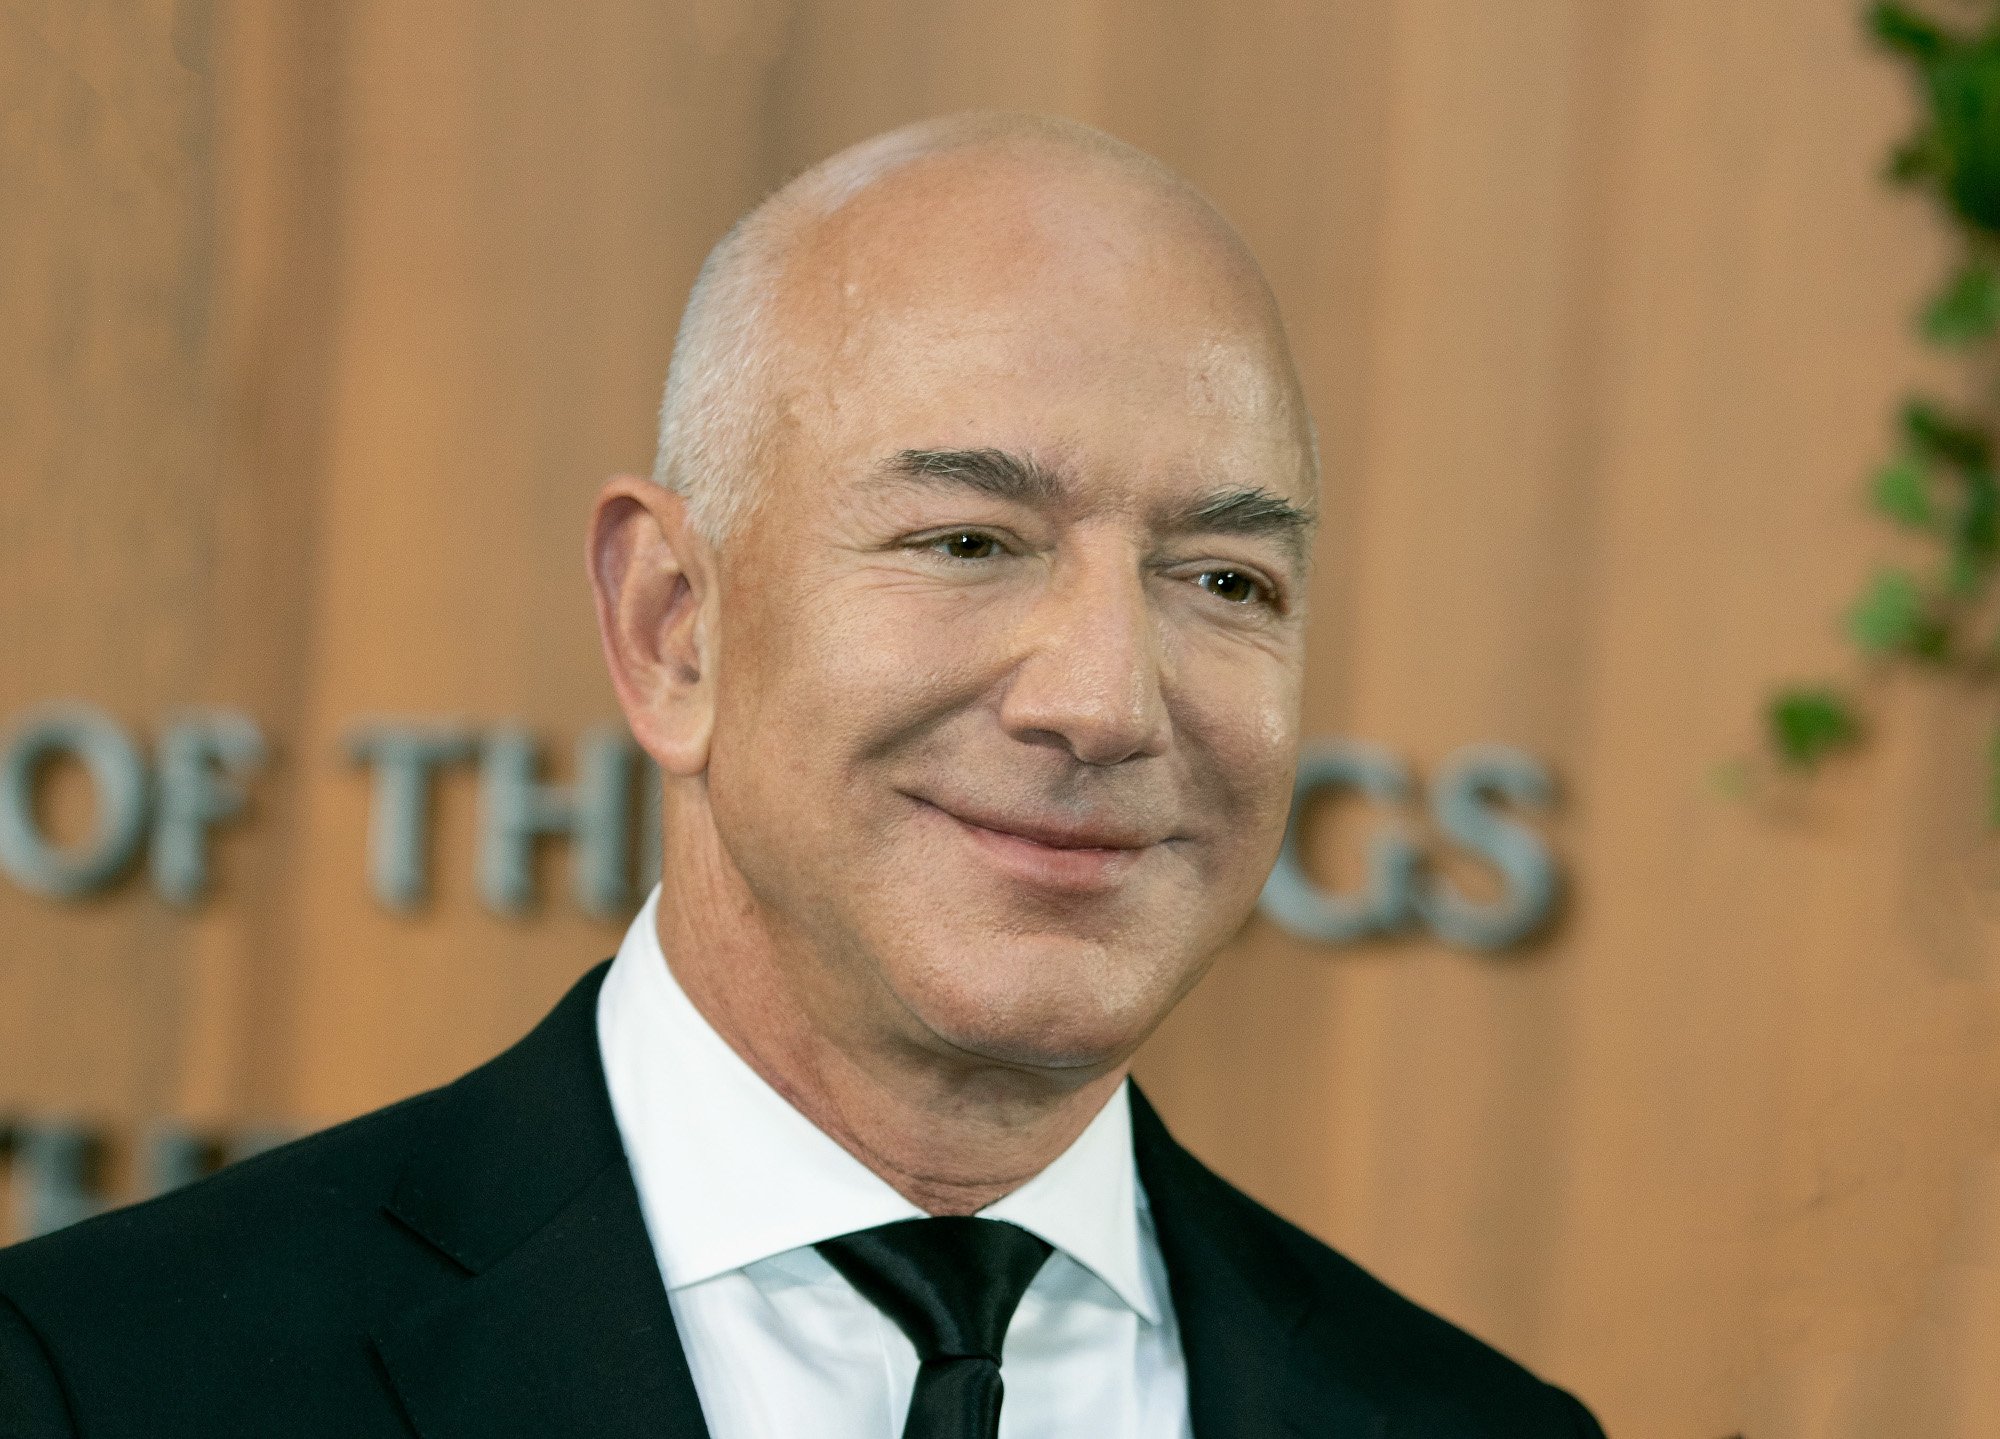 Amazon founder Jeff Bezos at the premiere for 'The Lord of the Rings: The Rings of Power.' He's wearing a white shirt, black suit, and black tie.